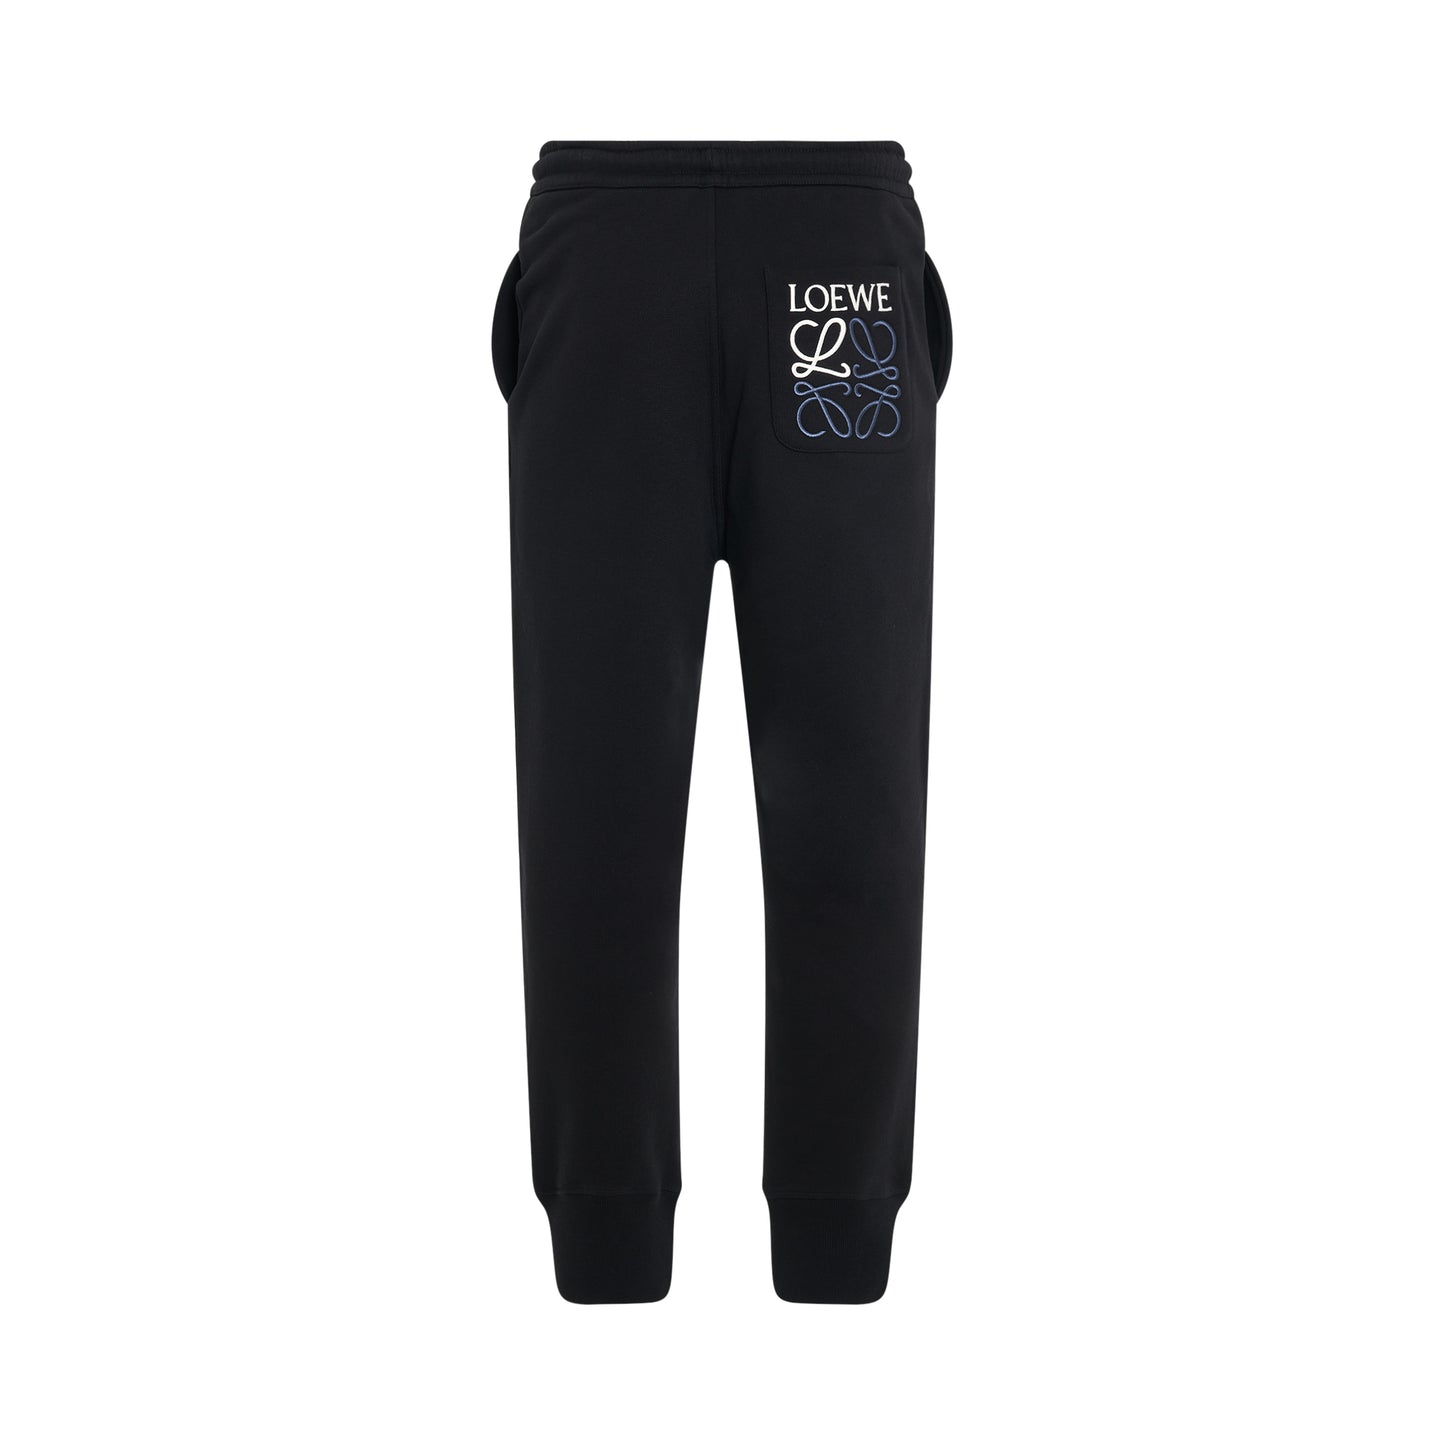 Relax Fit Sweatpants in Black